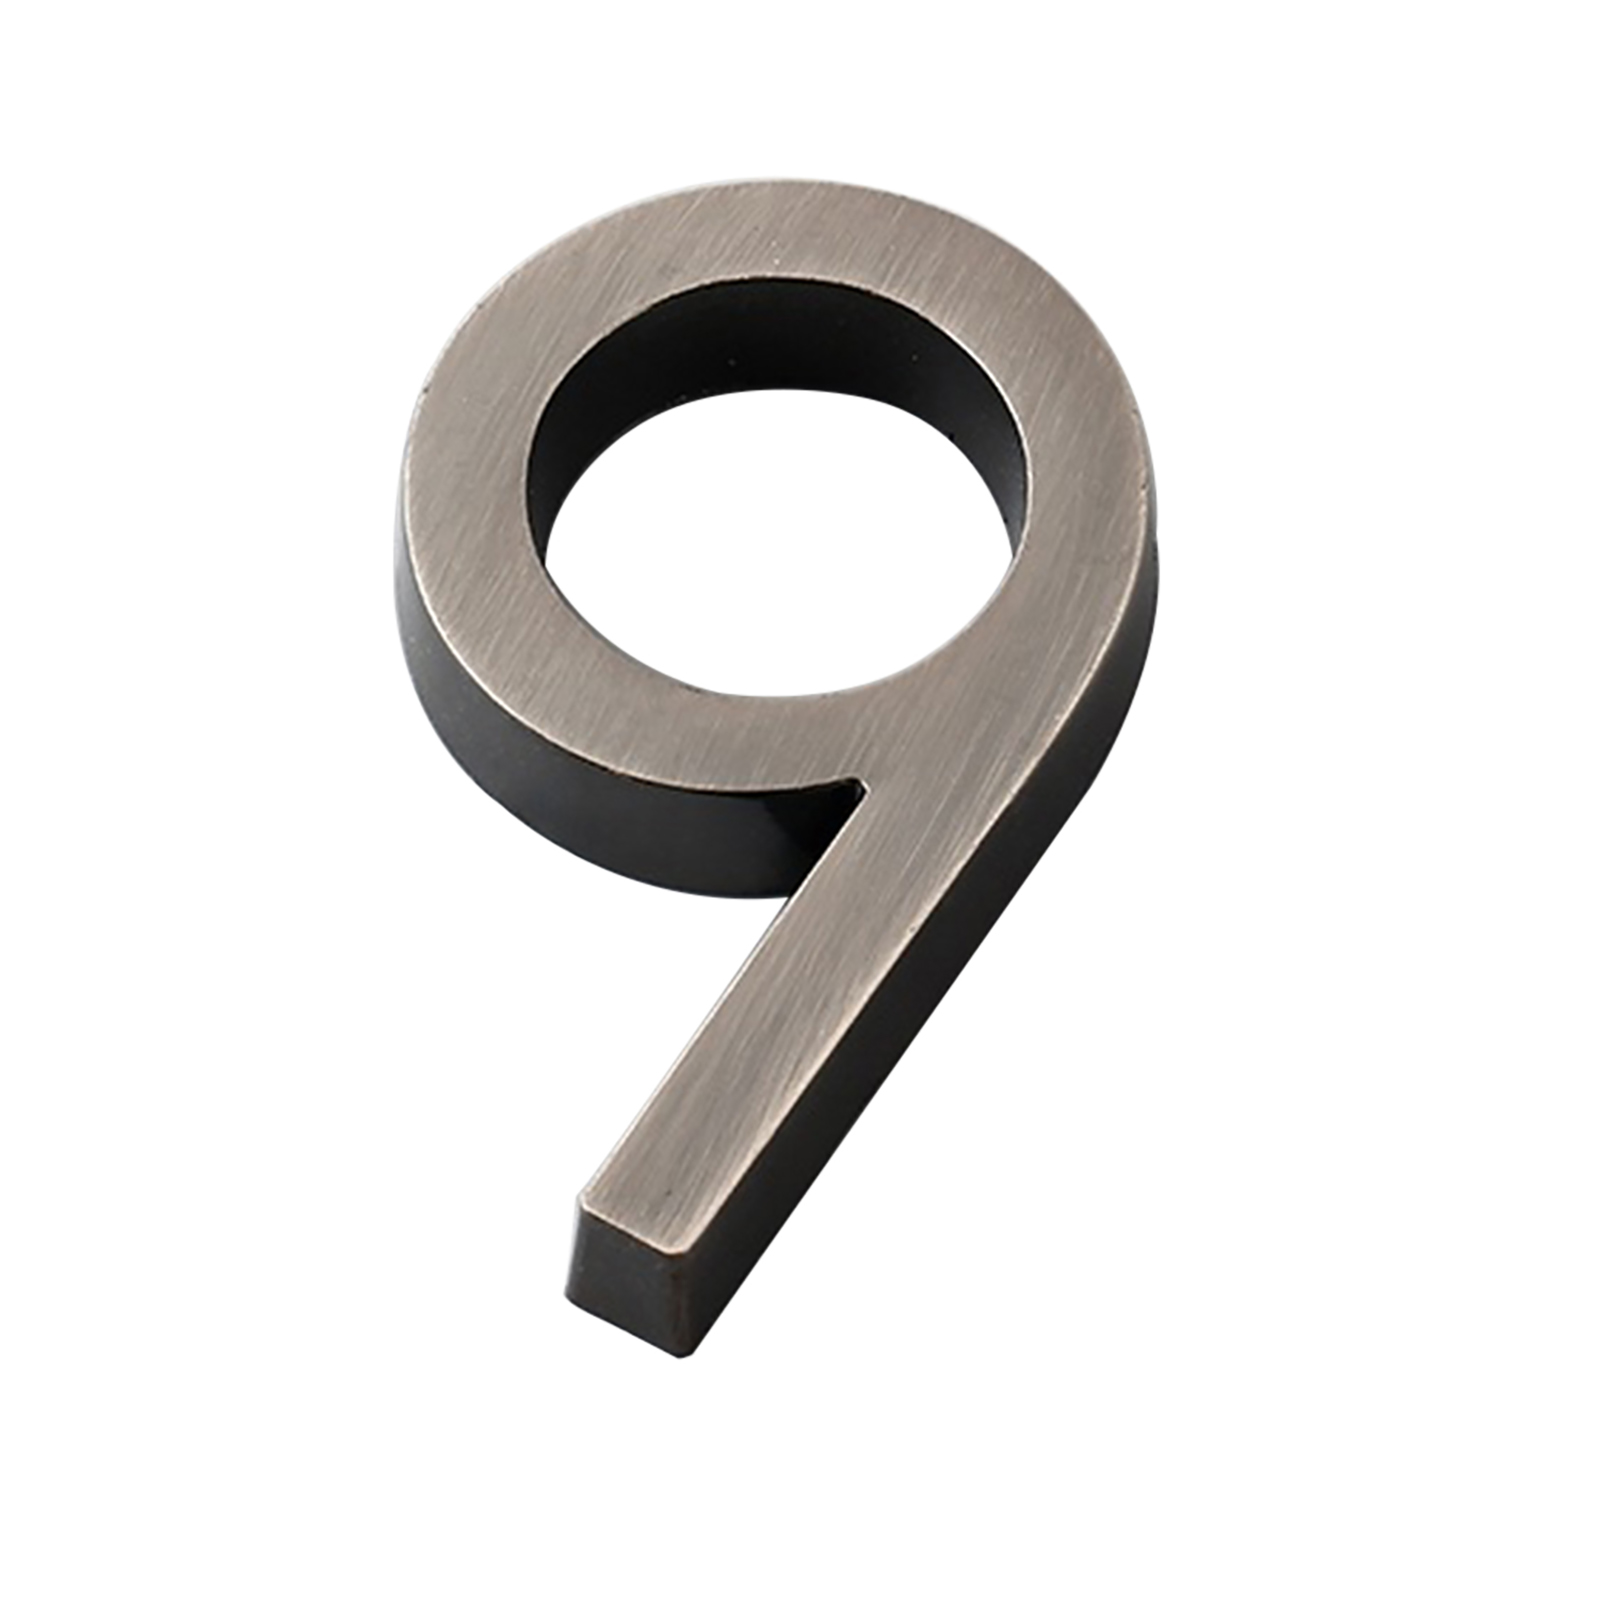 SPRING PARK Modern House Numbers Plaque Number Digits Sticker Plate Sign Numeral Door Letter - image 2 of 7